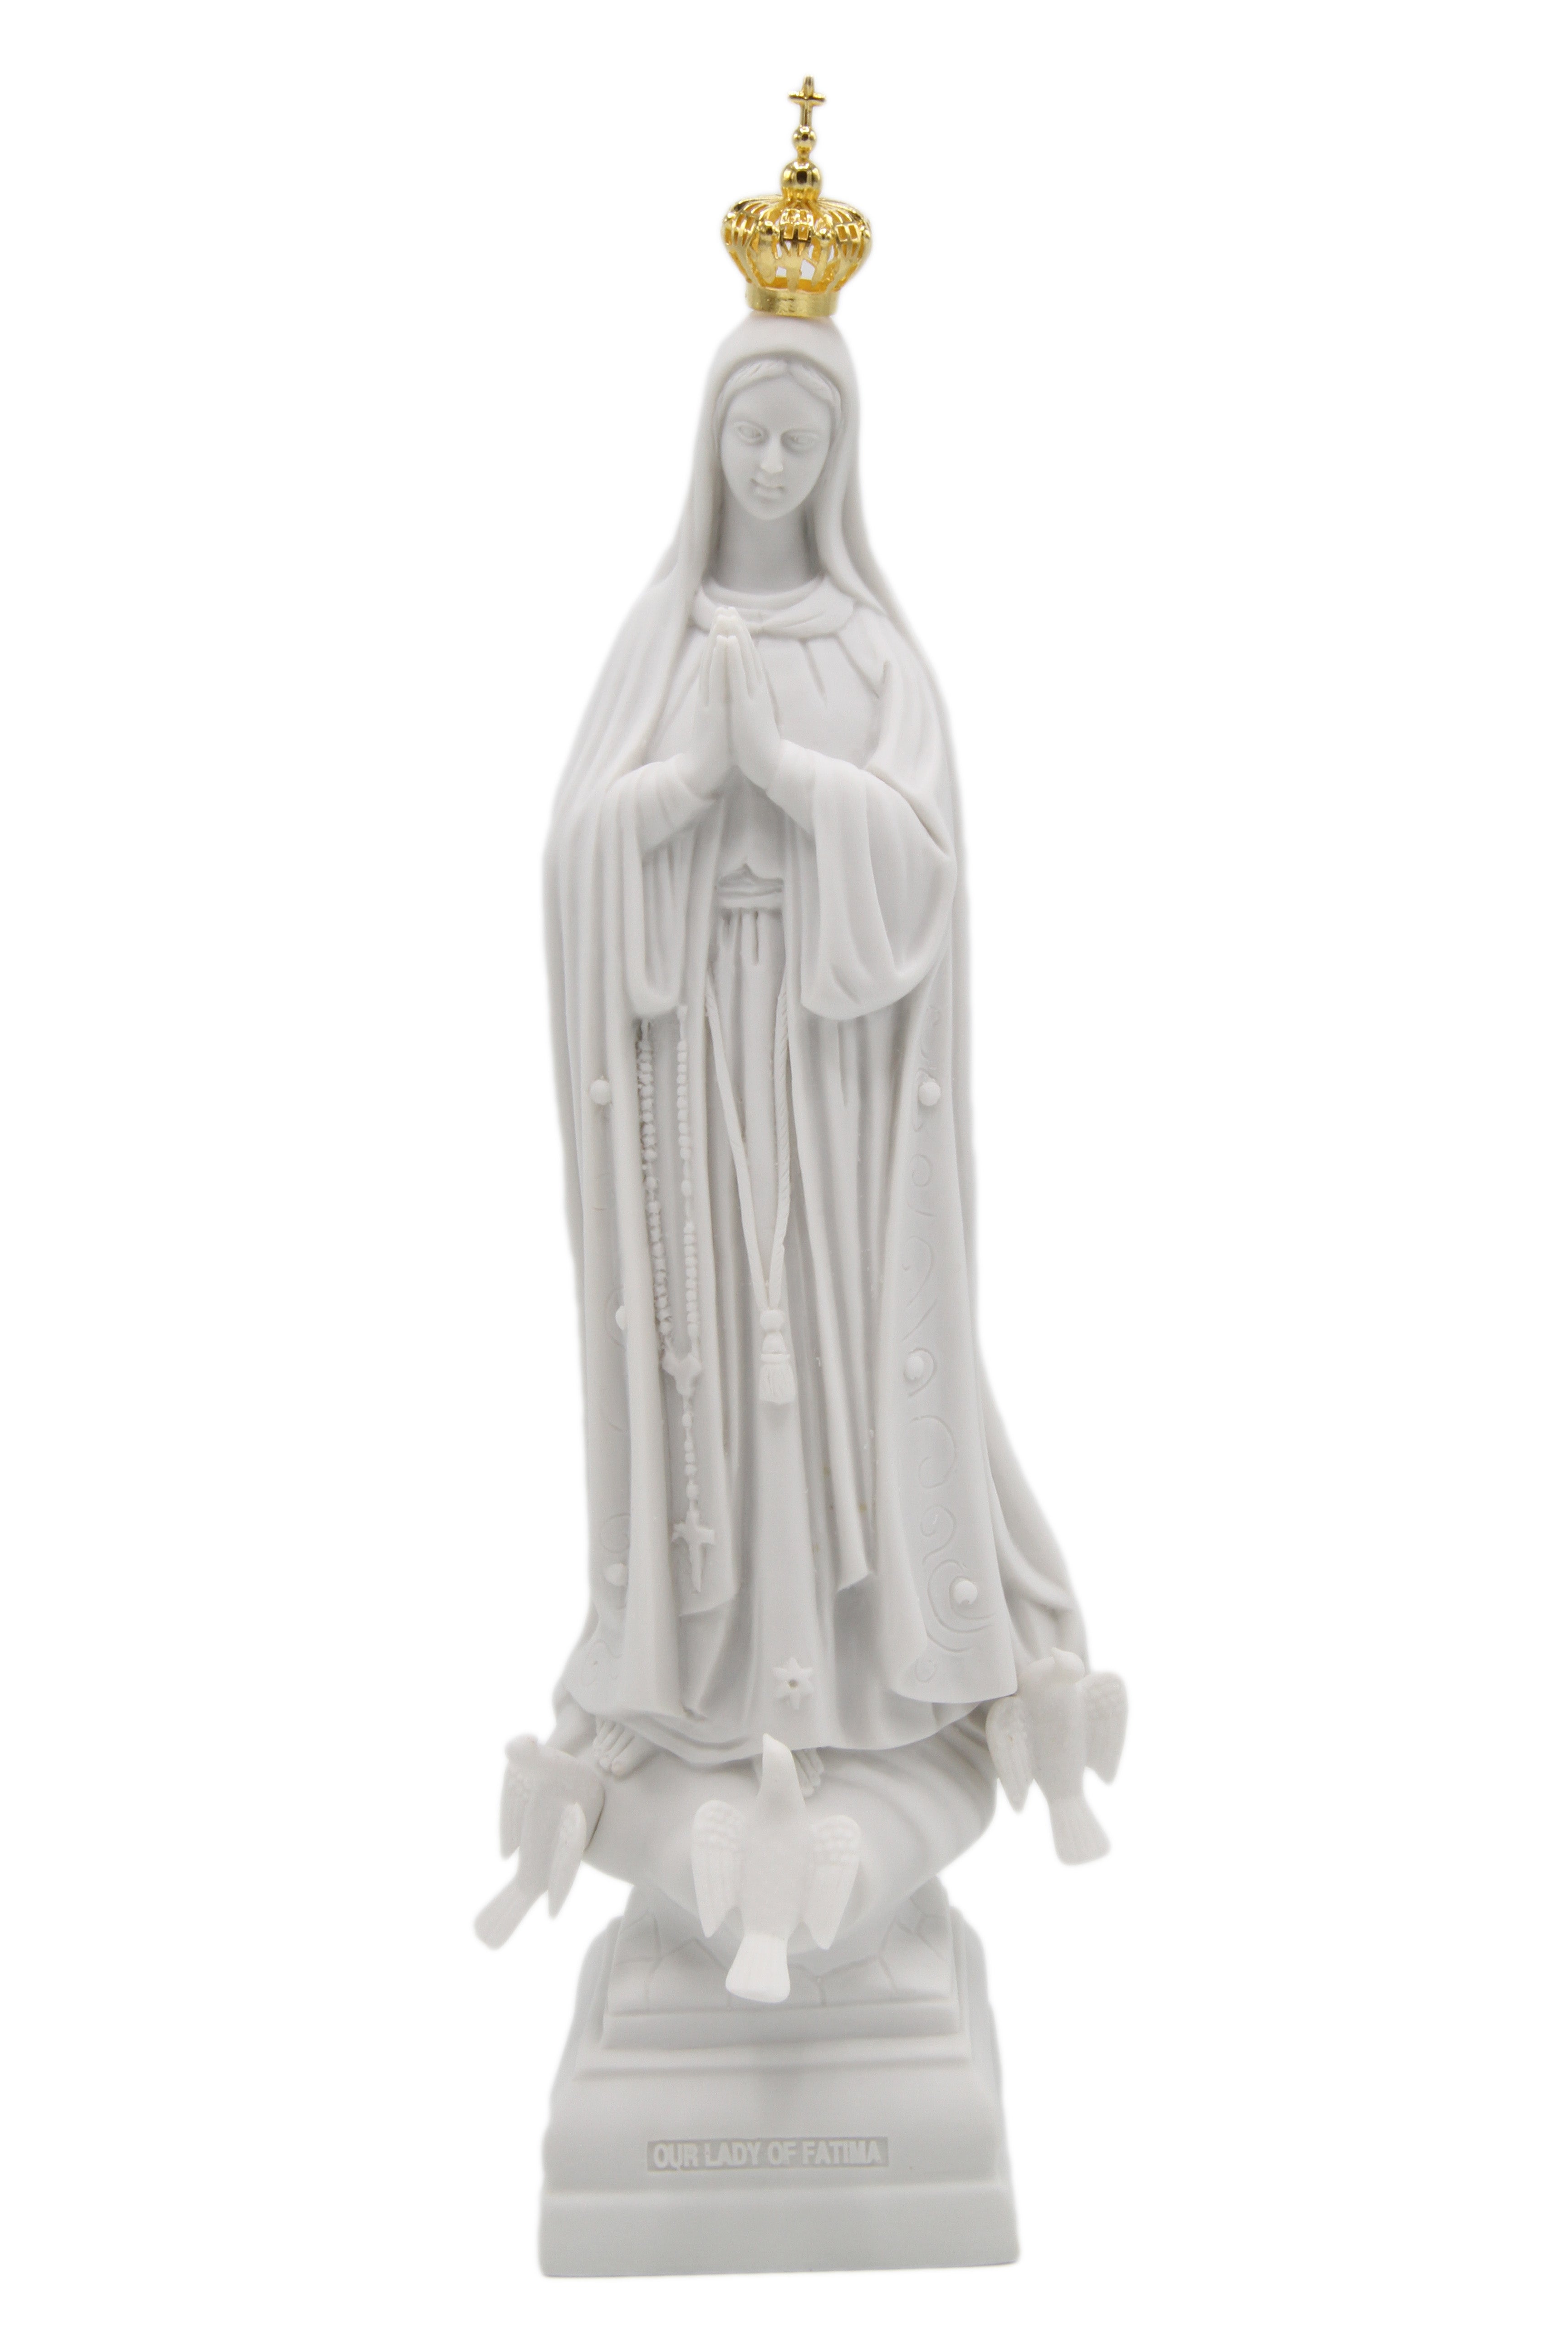 13 Inch Our Lady of Fatima Virgin Mary Catholic Statue Vittoria Collection Made in Italy